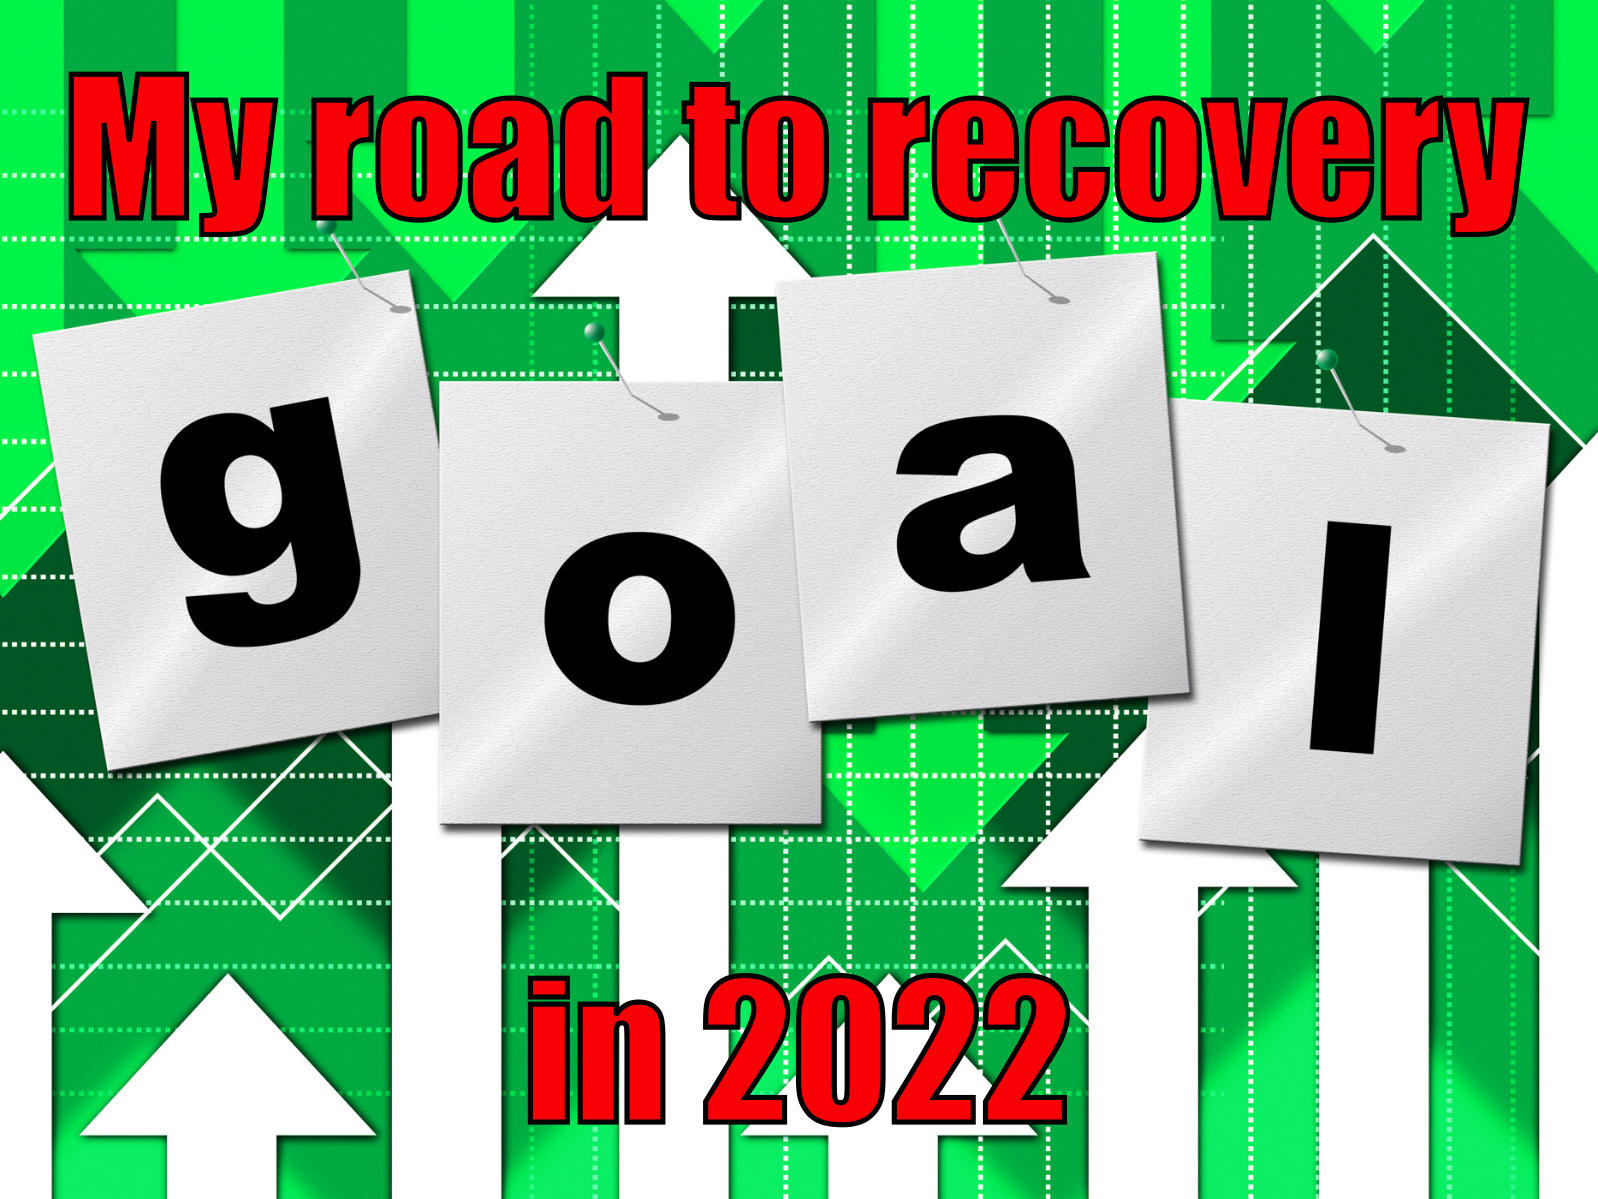 @wazza84/road-to-recovery-my-goal-and-how-i-plan-to-get-there